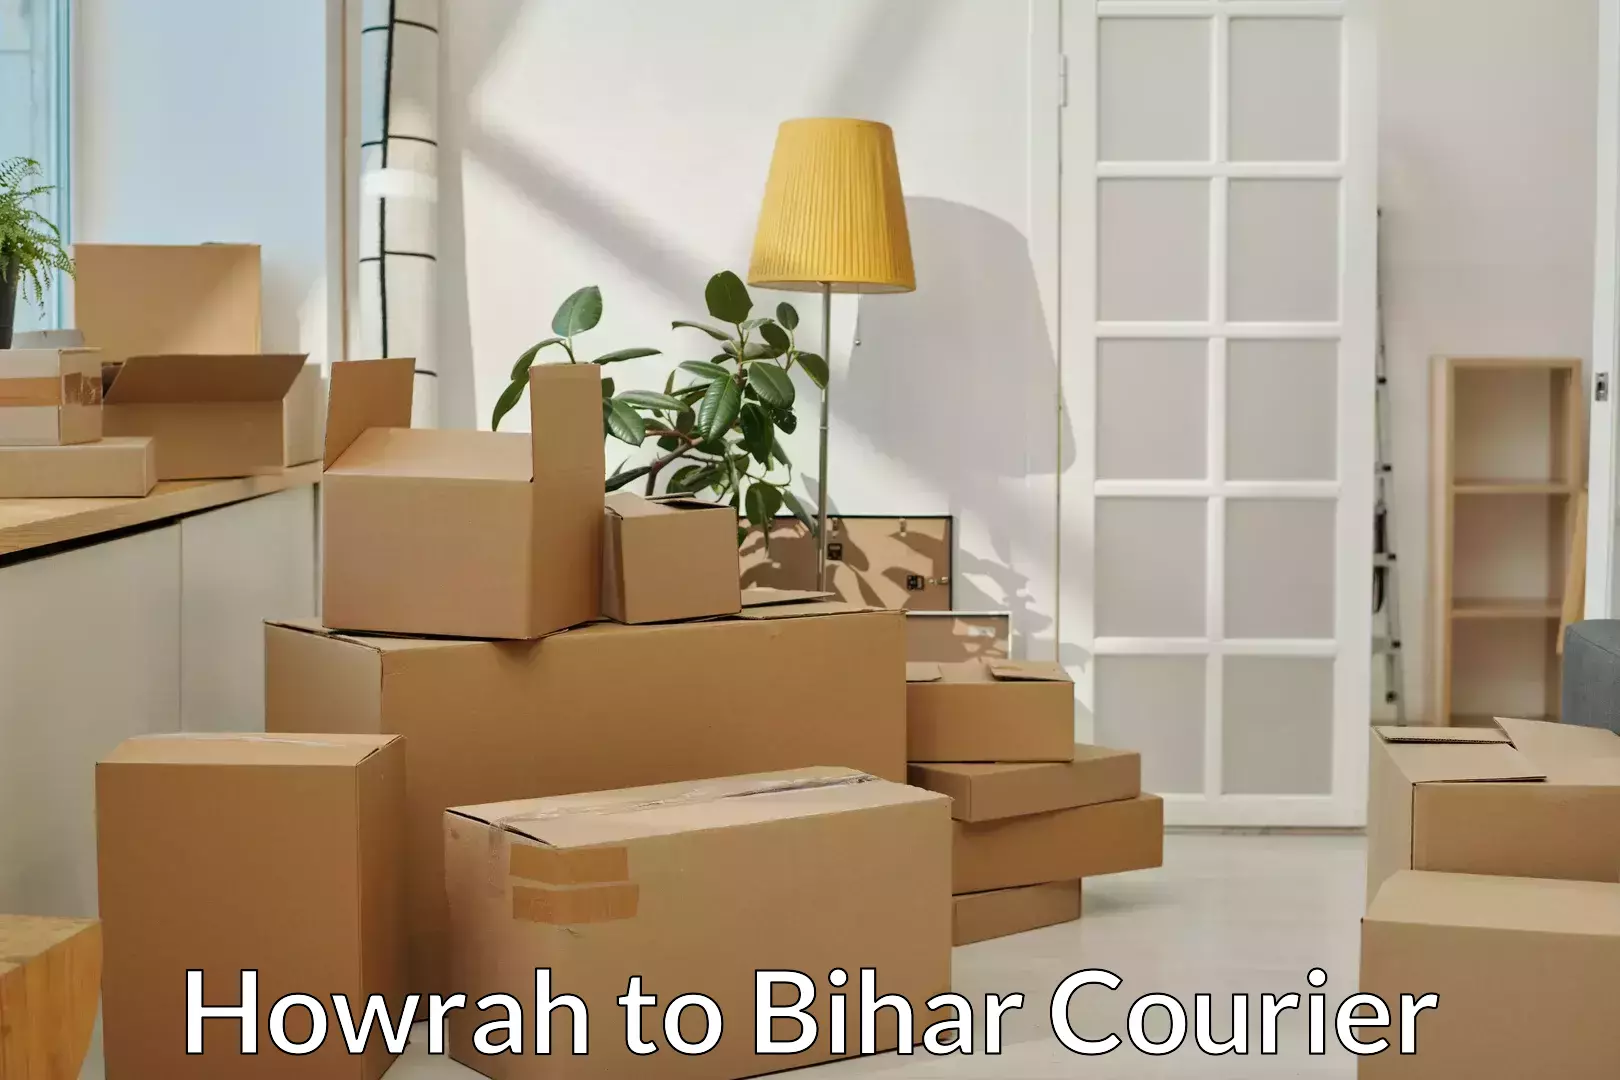 Furniture moving specialists Howrah to Bihar